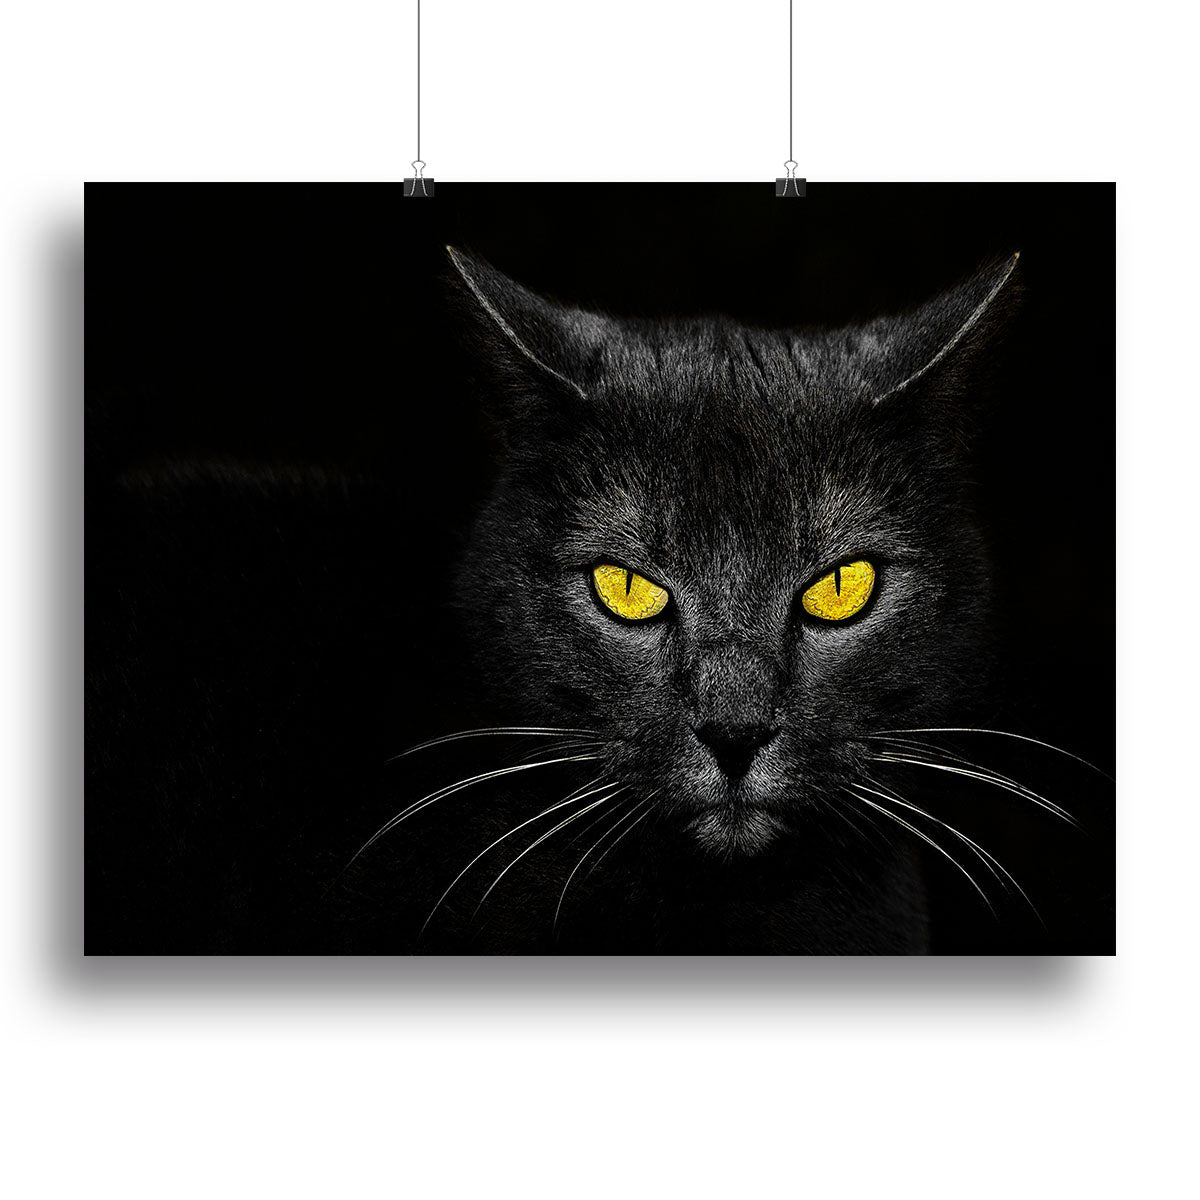 Black Cat Canvas Print or Poster - 1x - 2